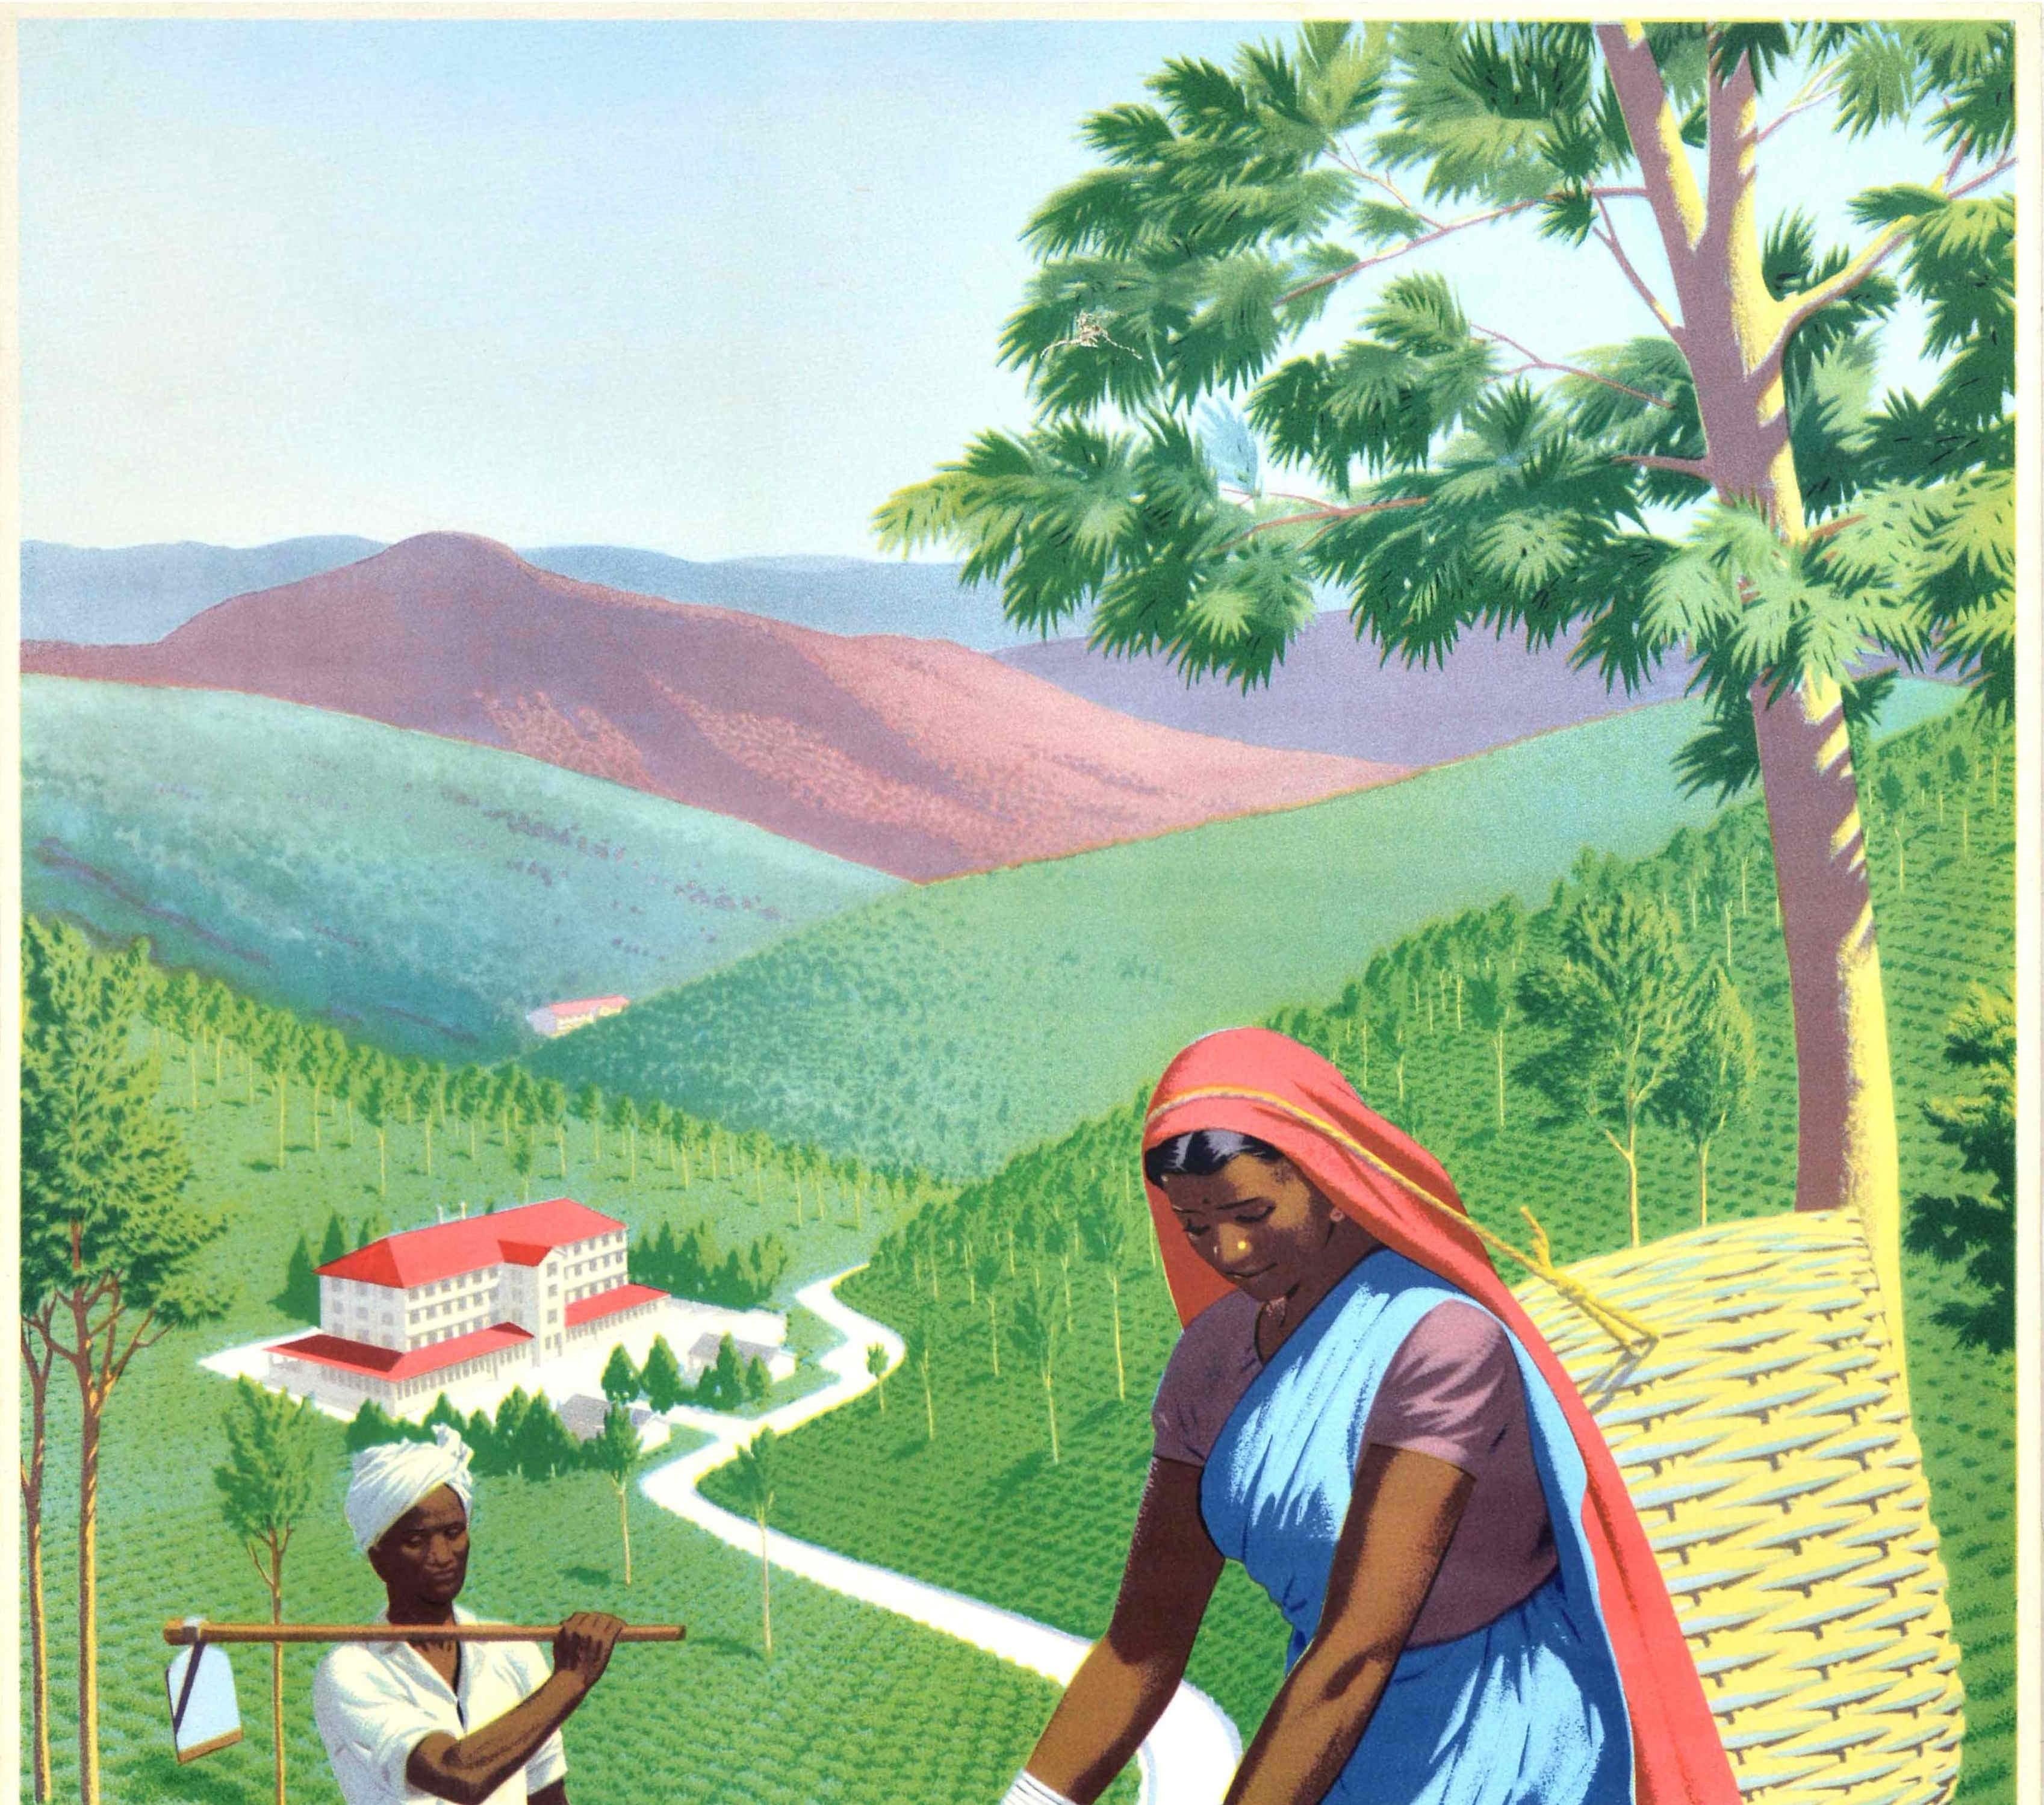 Original vintage poster - Plucking Tea in Ceylon (Sri Lanka) - issued by the Tea Bureau featuring an agricultural illustration of a lady in blue and red clothing picking tea leaves an carrying a basket on her head with another farm worker in white